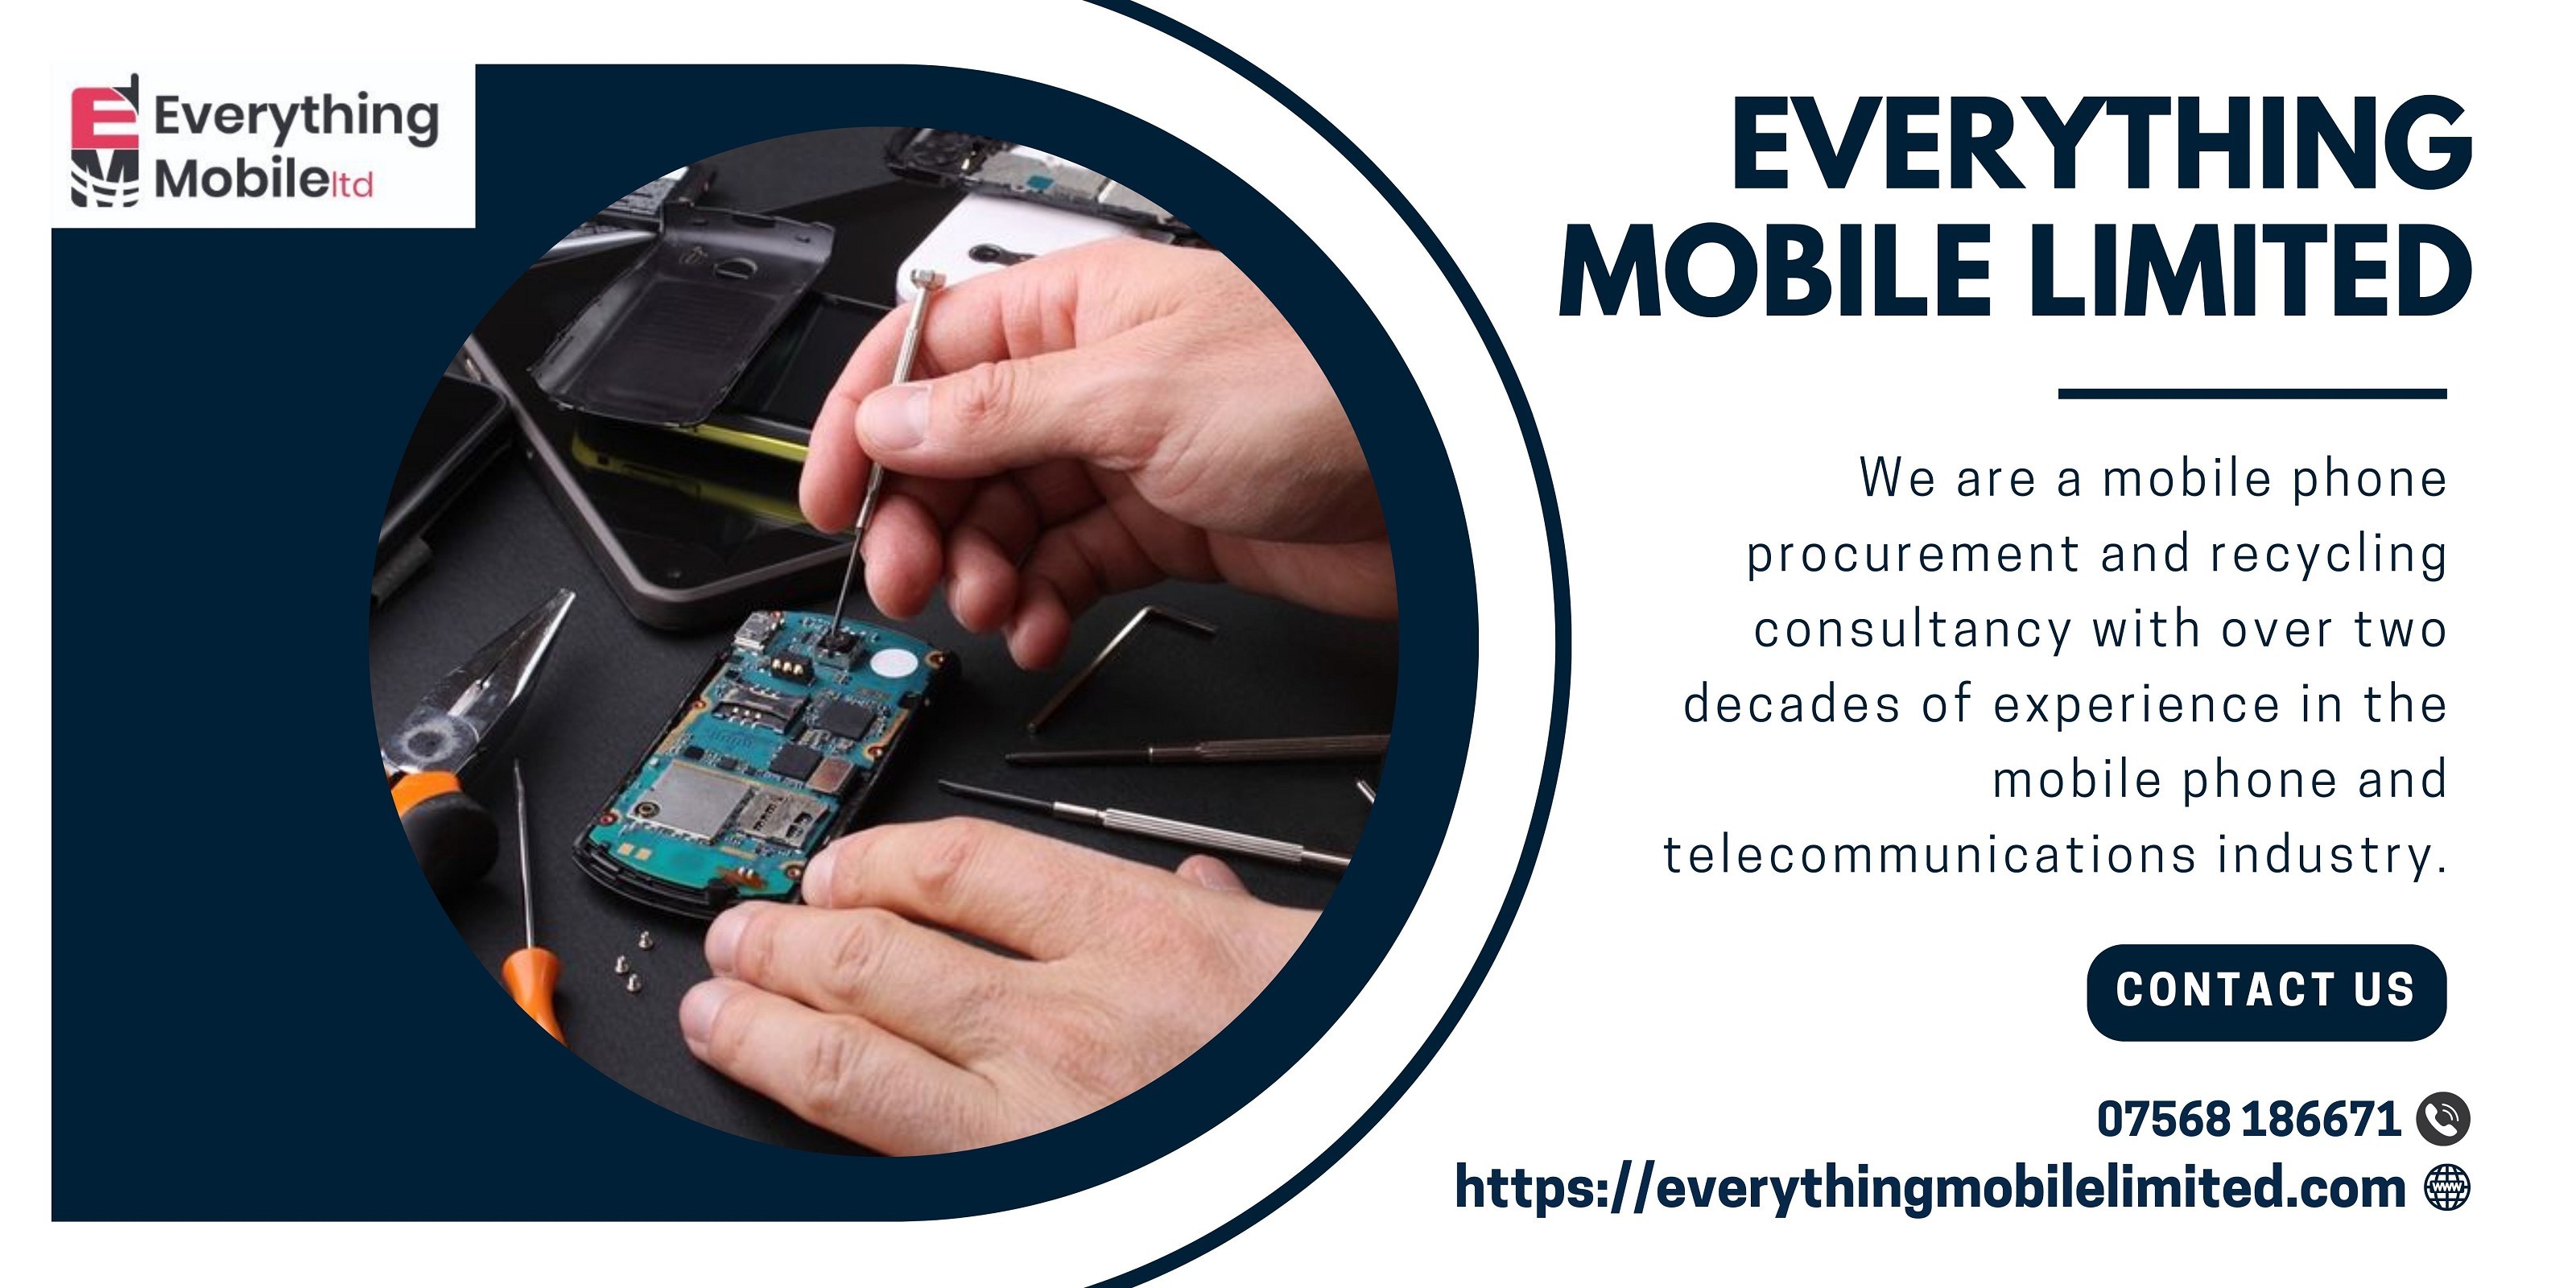 Get Your Old Mobile Phones Recycled At Everything Mobile Limited